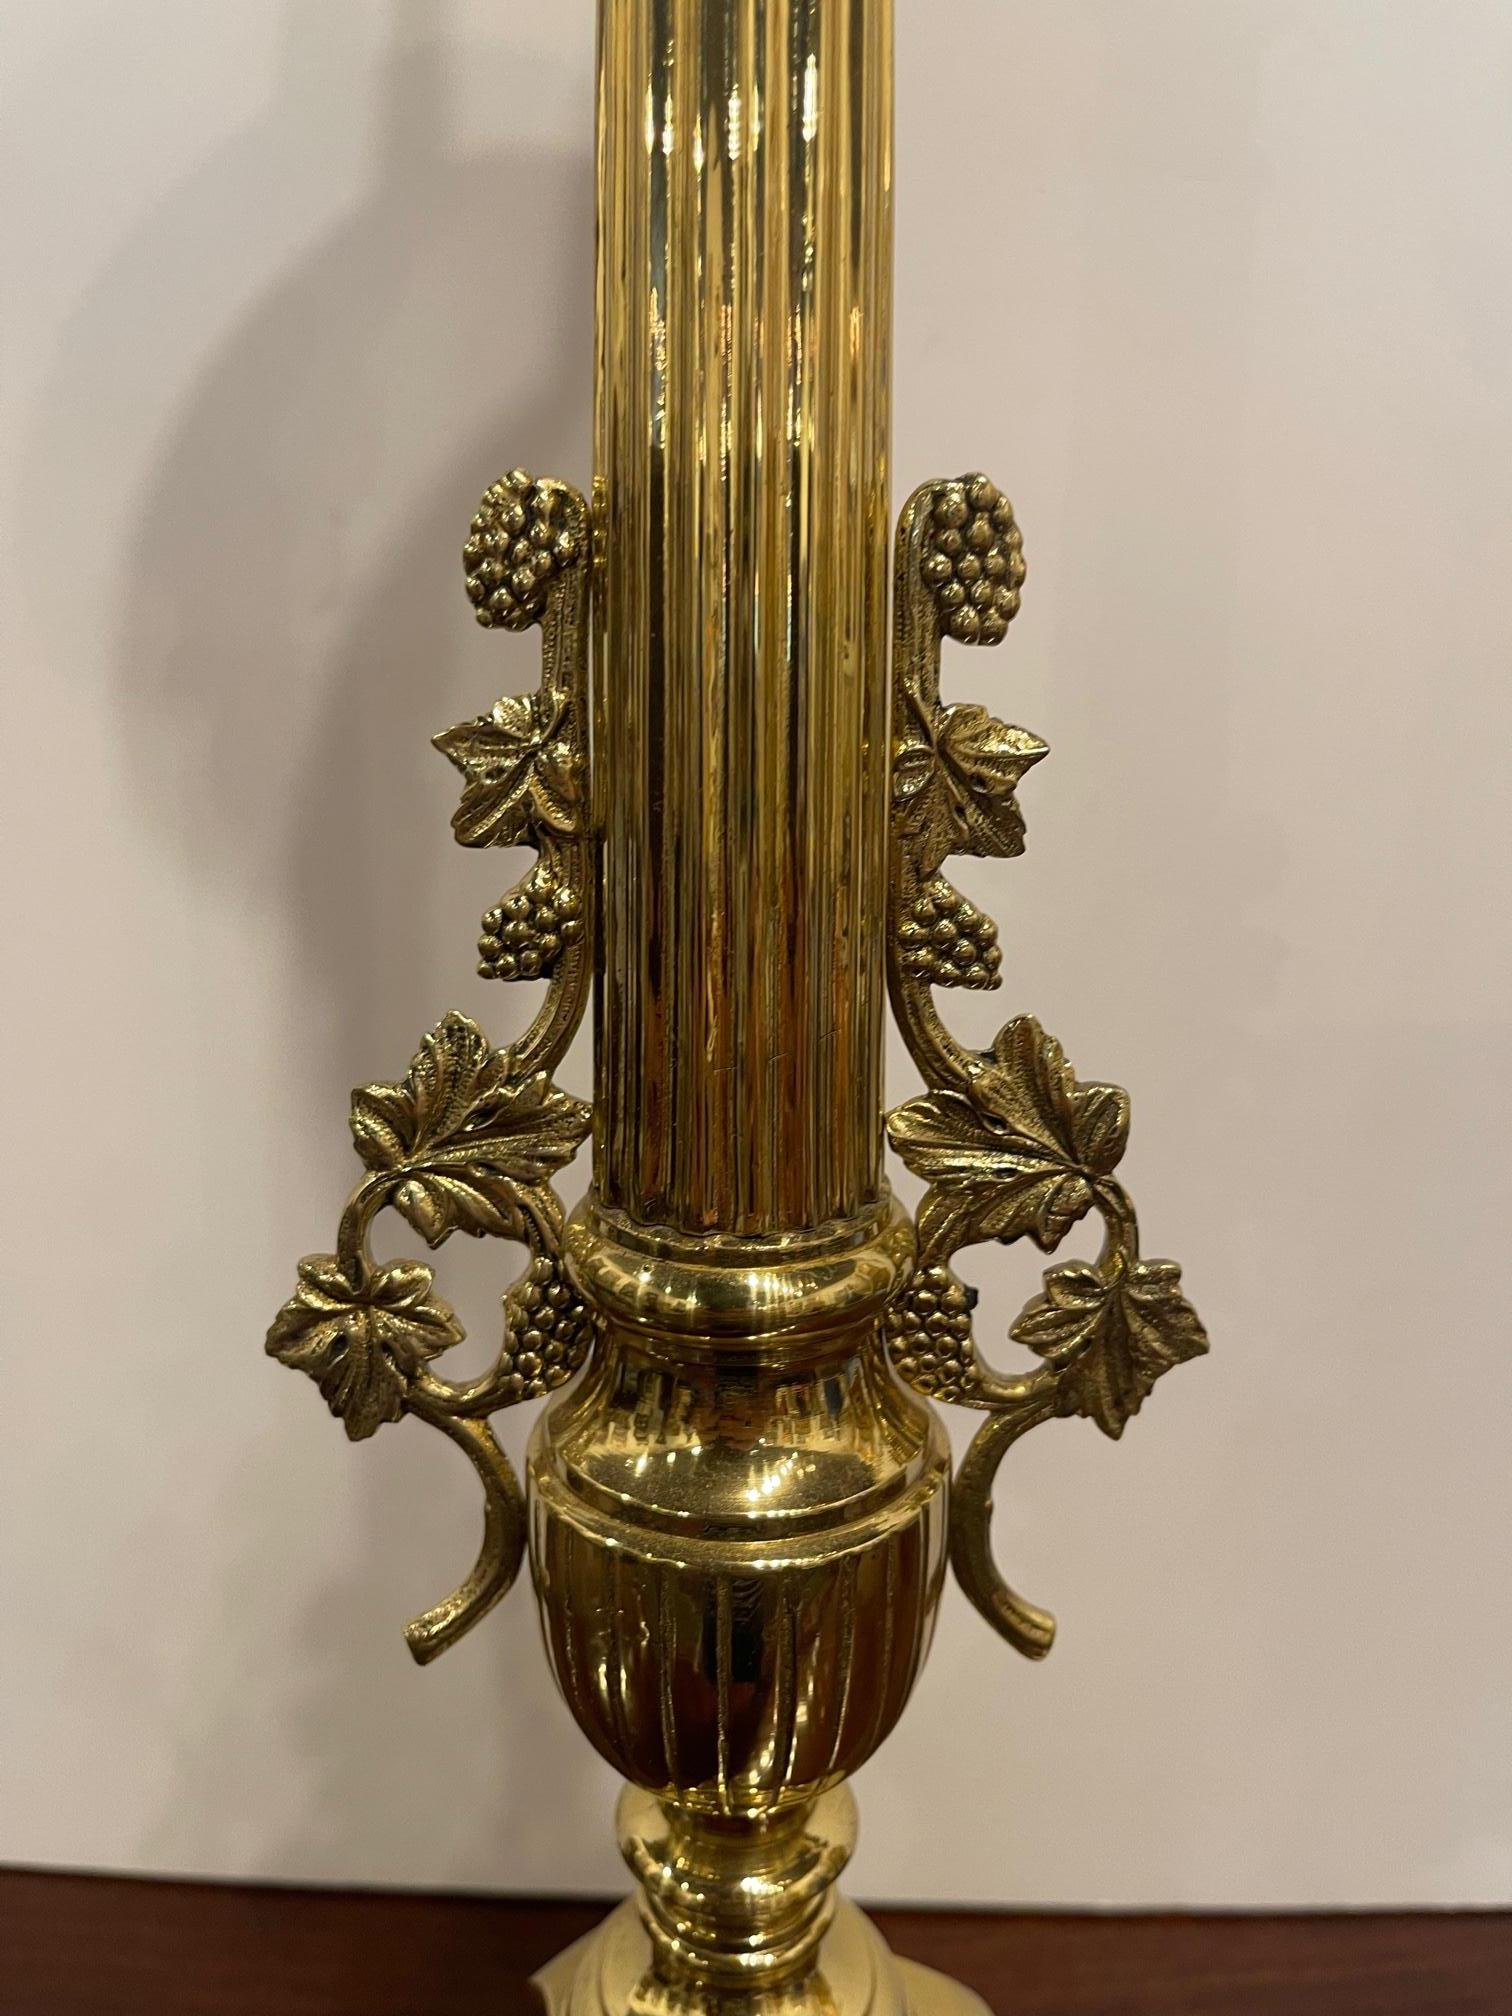 French Polished Brass Decorative Pricket or Candlestick, 19th Century For Sale 1